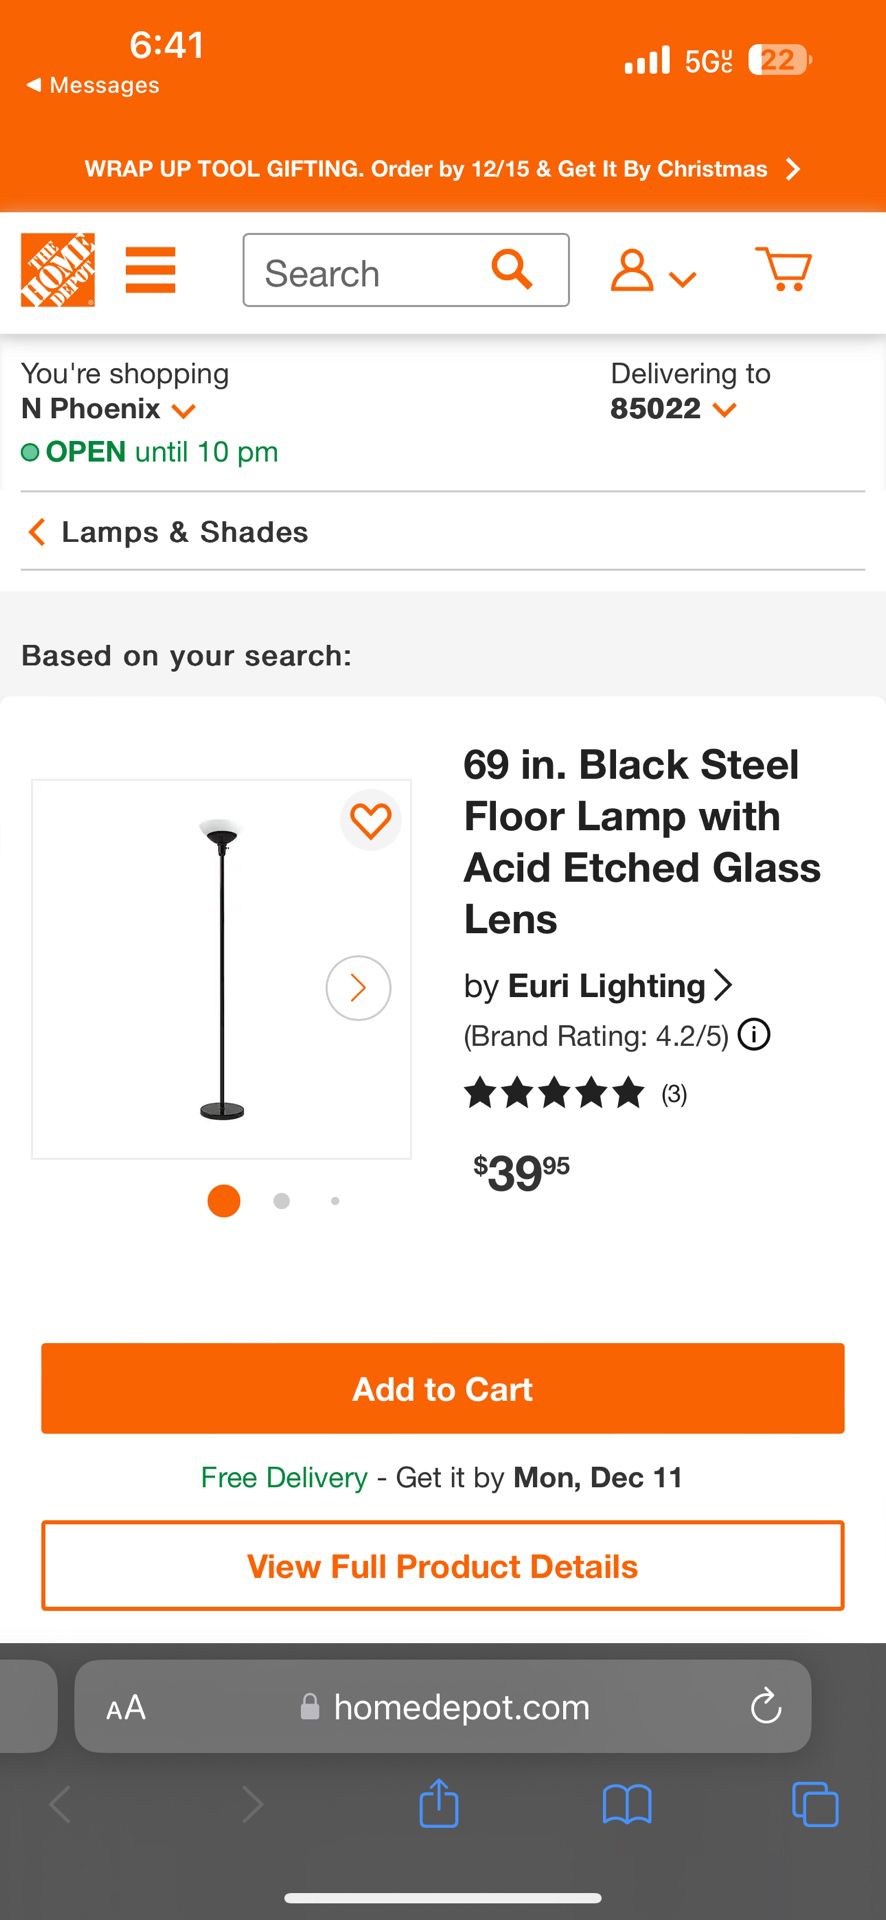 69 in. Black Steel Floor Lamp with Acid Etched Glass Lens